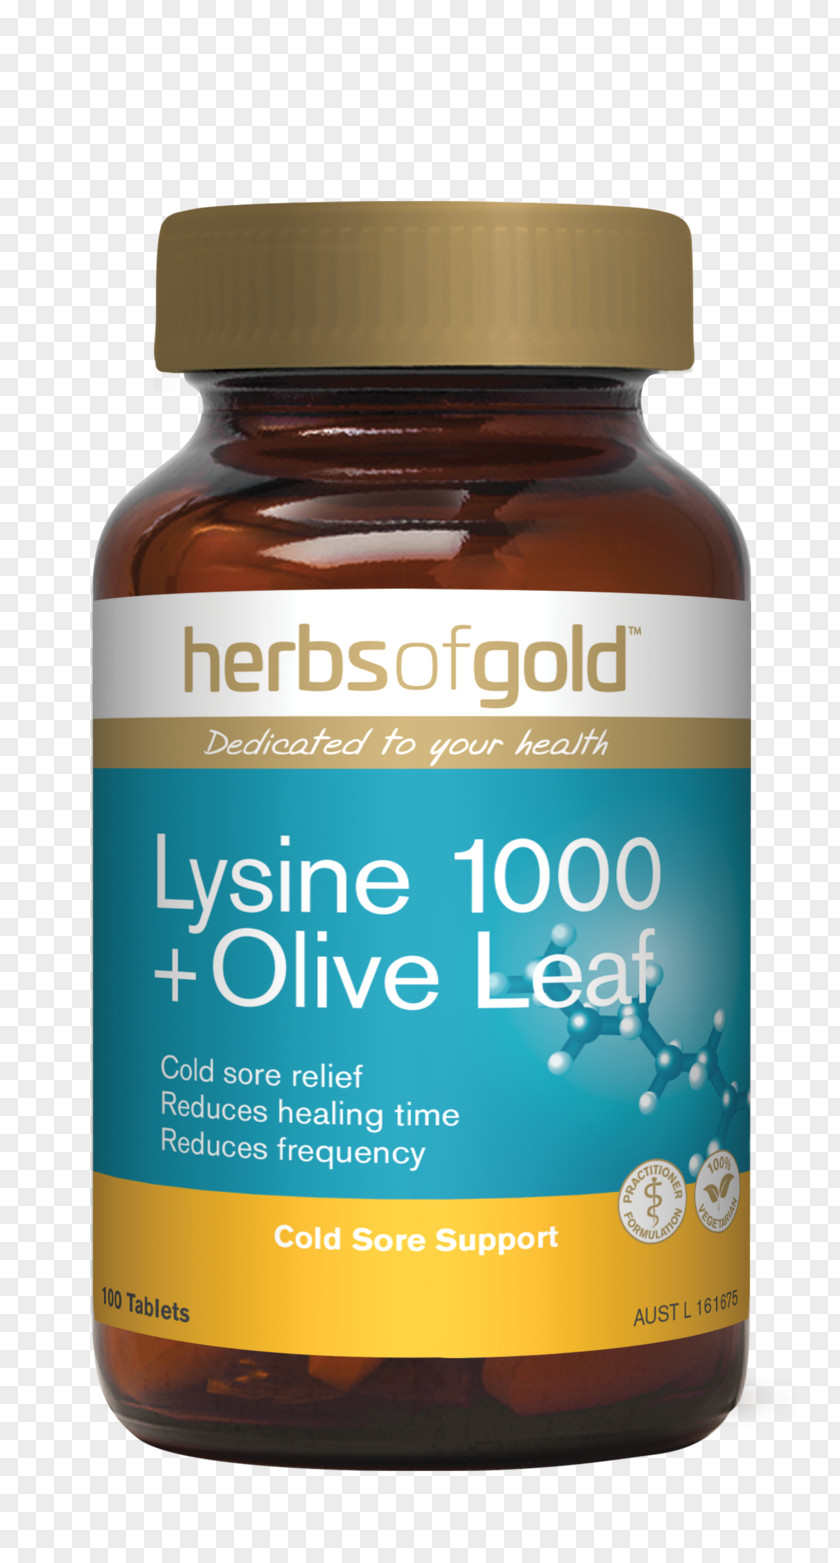 Herbs Allergic Inflammation Of Gold Lysine 1000 + Olive Leaf 100 Tablets Liver Care 60t Product Health PNG